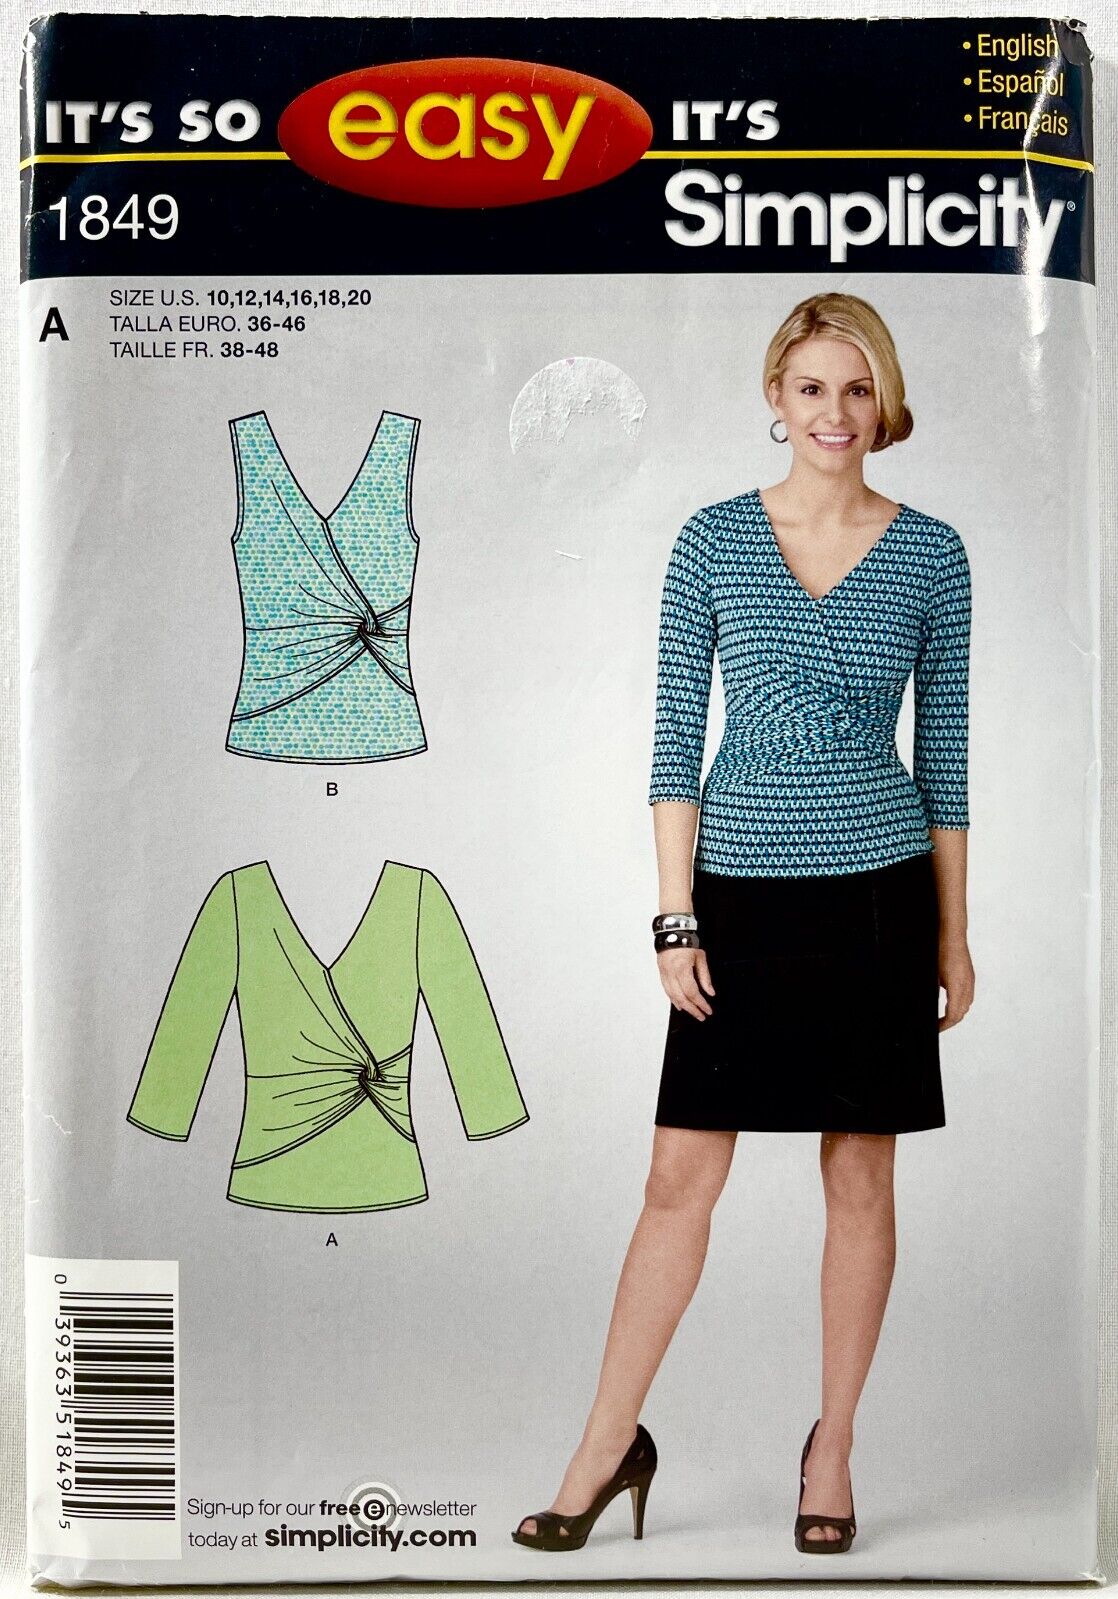 2012 Simplicity Sewing Pattern 1849 Womens Knit Tops 2 Sleeves Size 10-20 13646